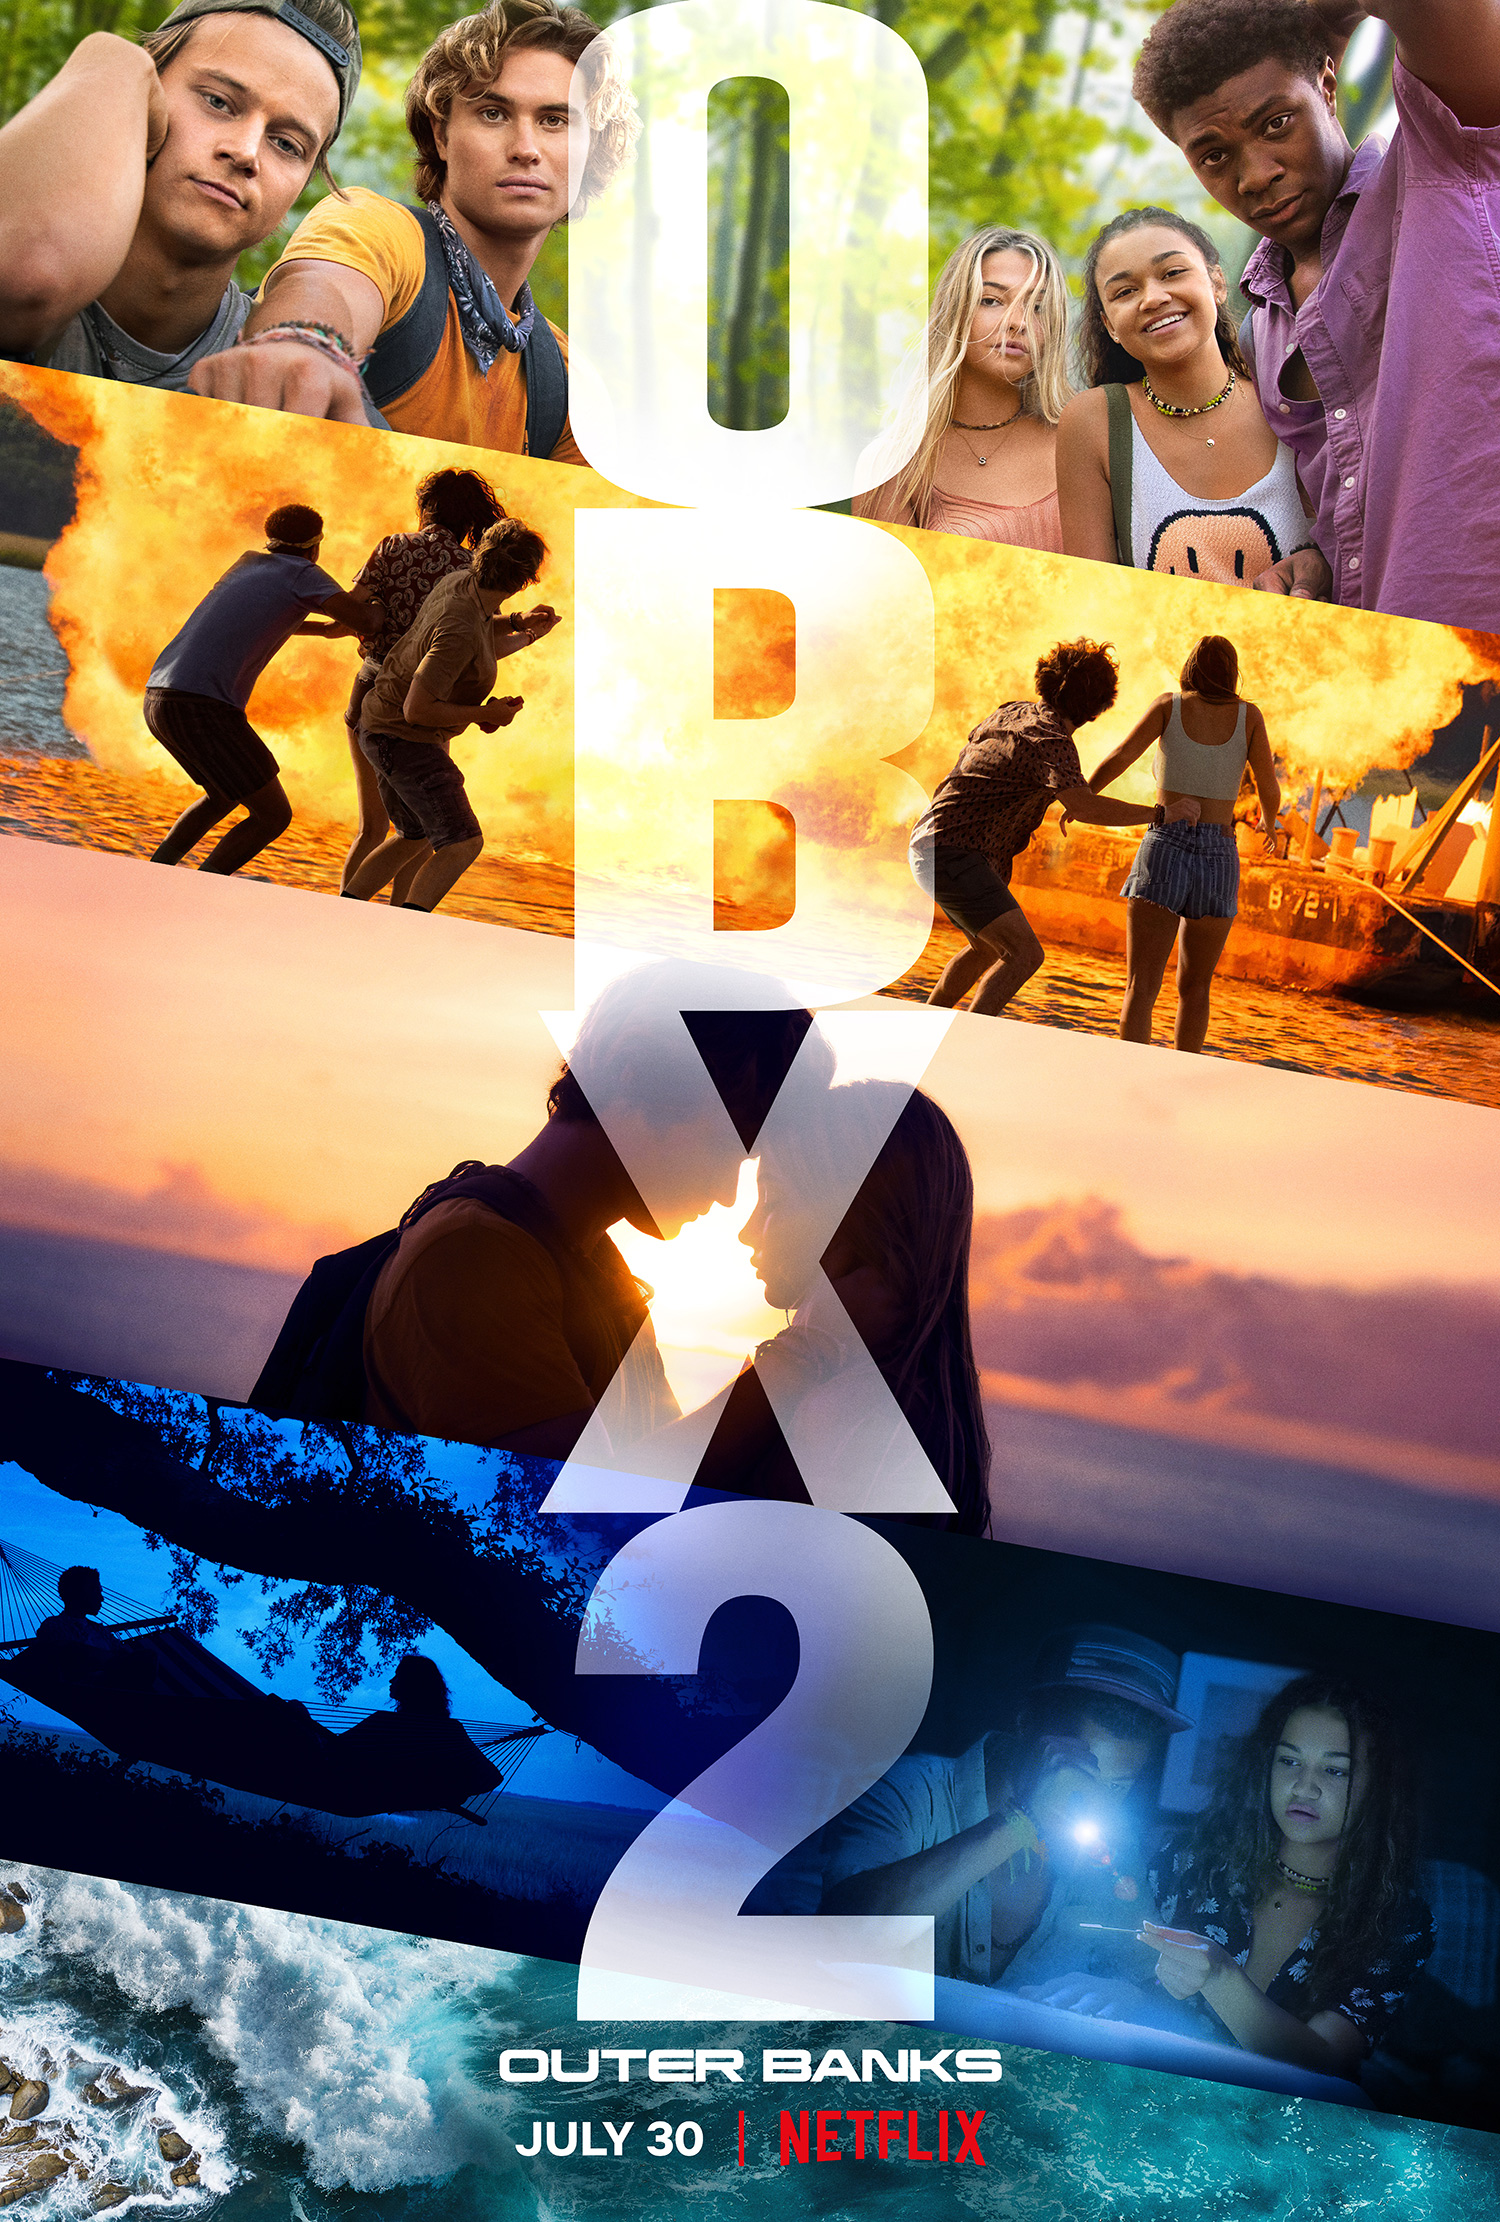 https://static.wikia.nocookie.net/outer-banks-netflix/images/5/5d/Outer_Banks_Season_2_Poster.jpg/revision/latest?cb=20210715002059